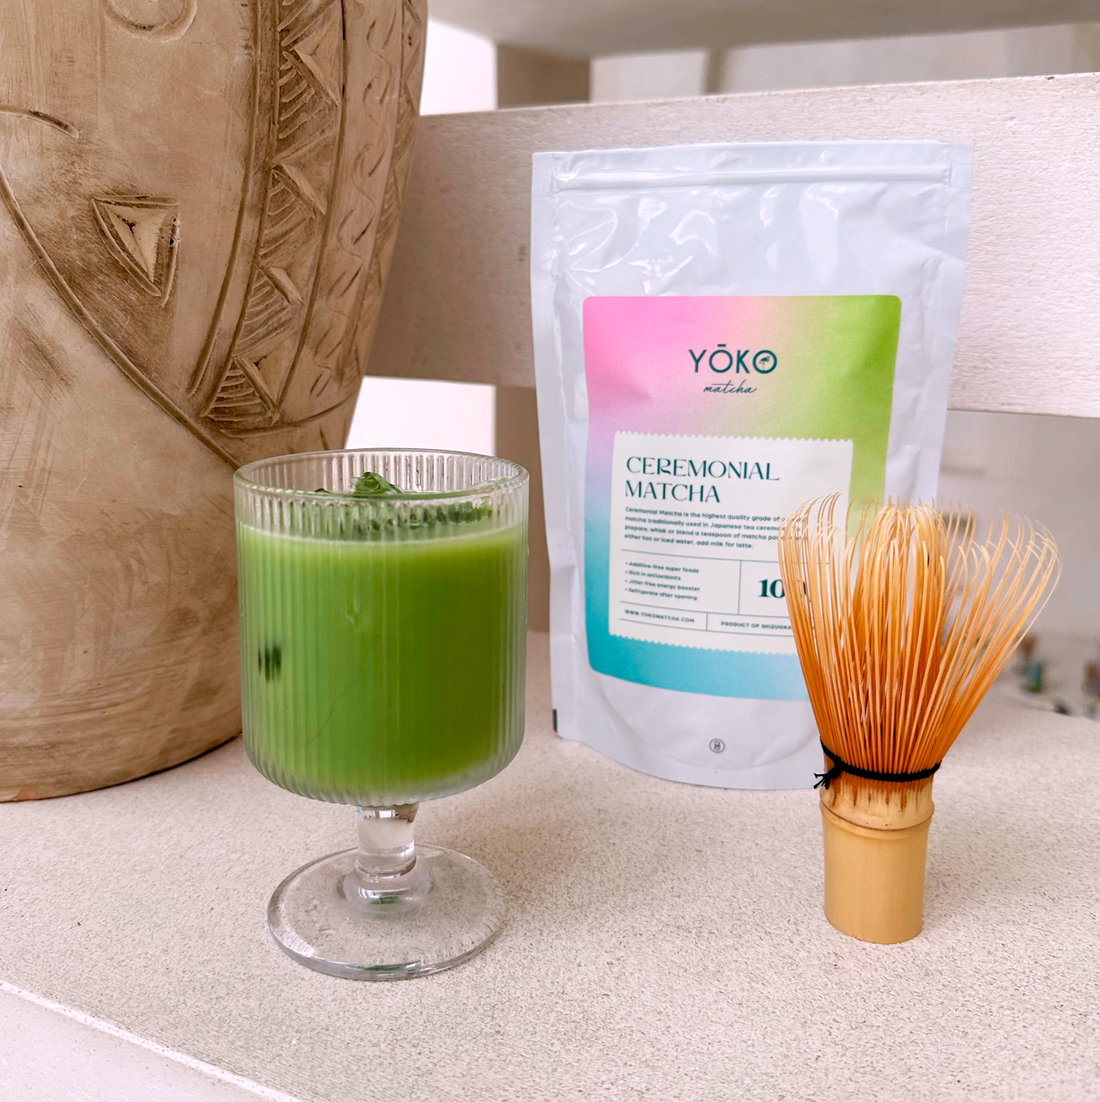 Power of Matcha Catechins and EGCG in Green Tea